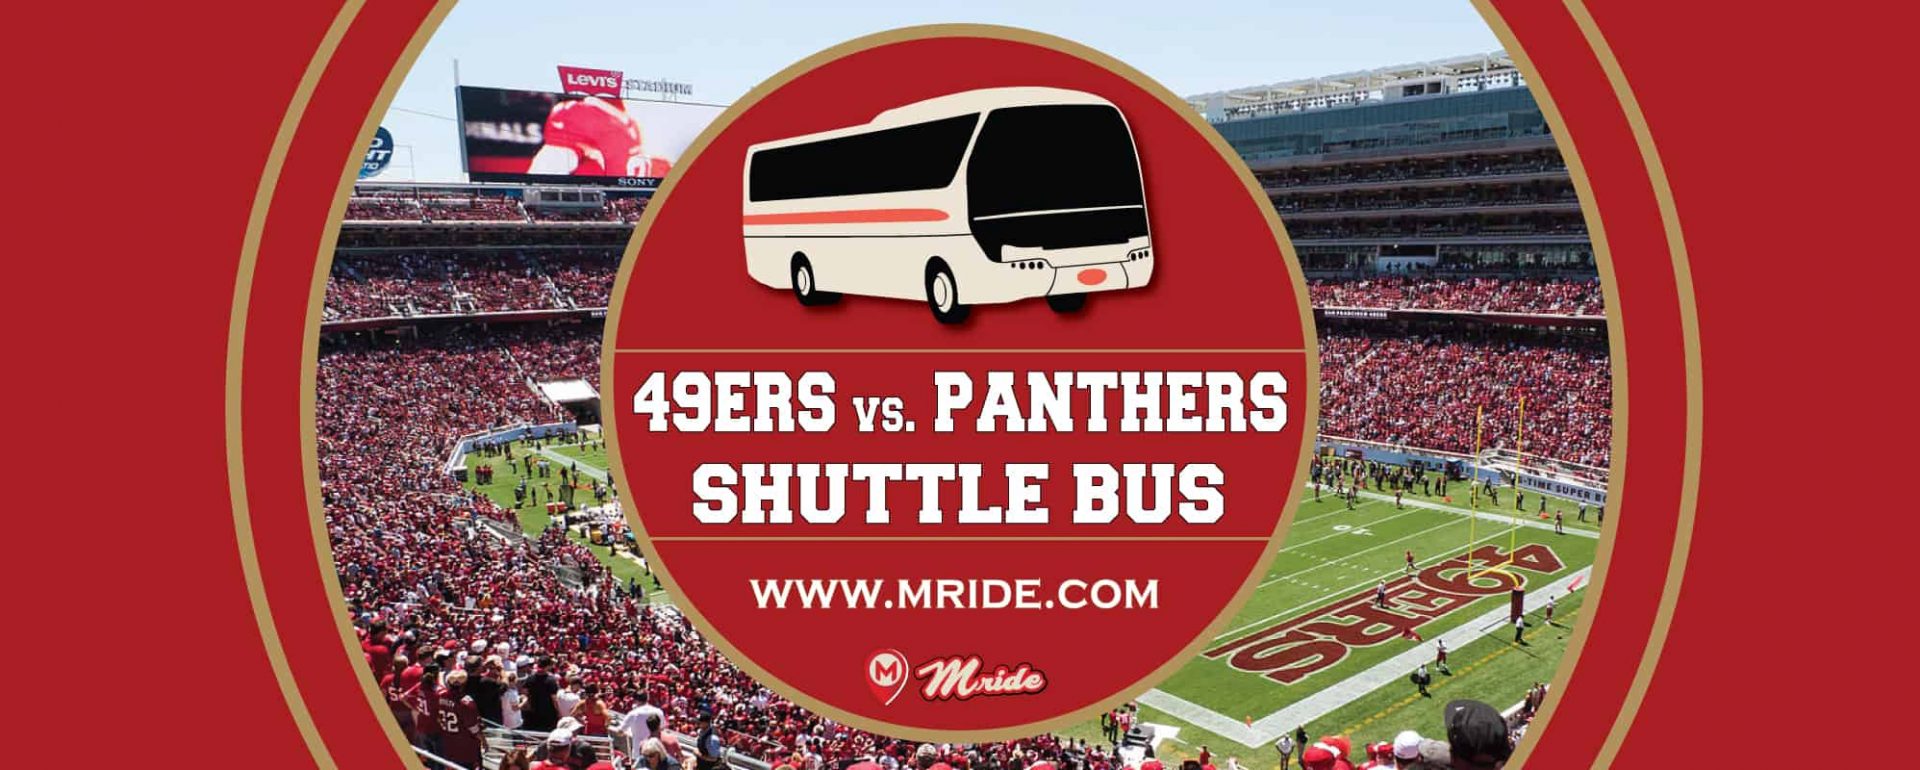 49ers vs. Panthers Shuttle Bus